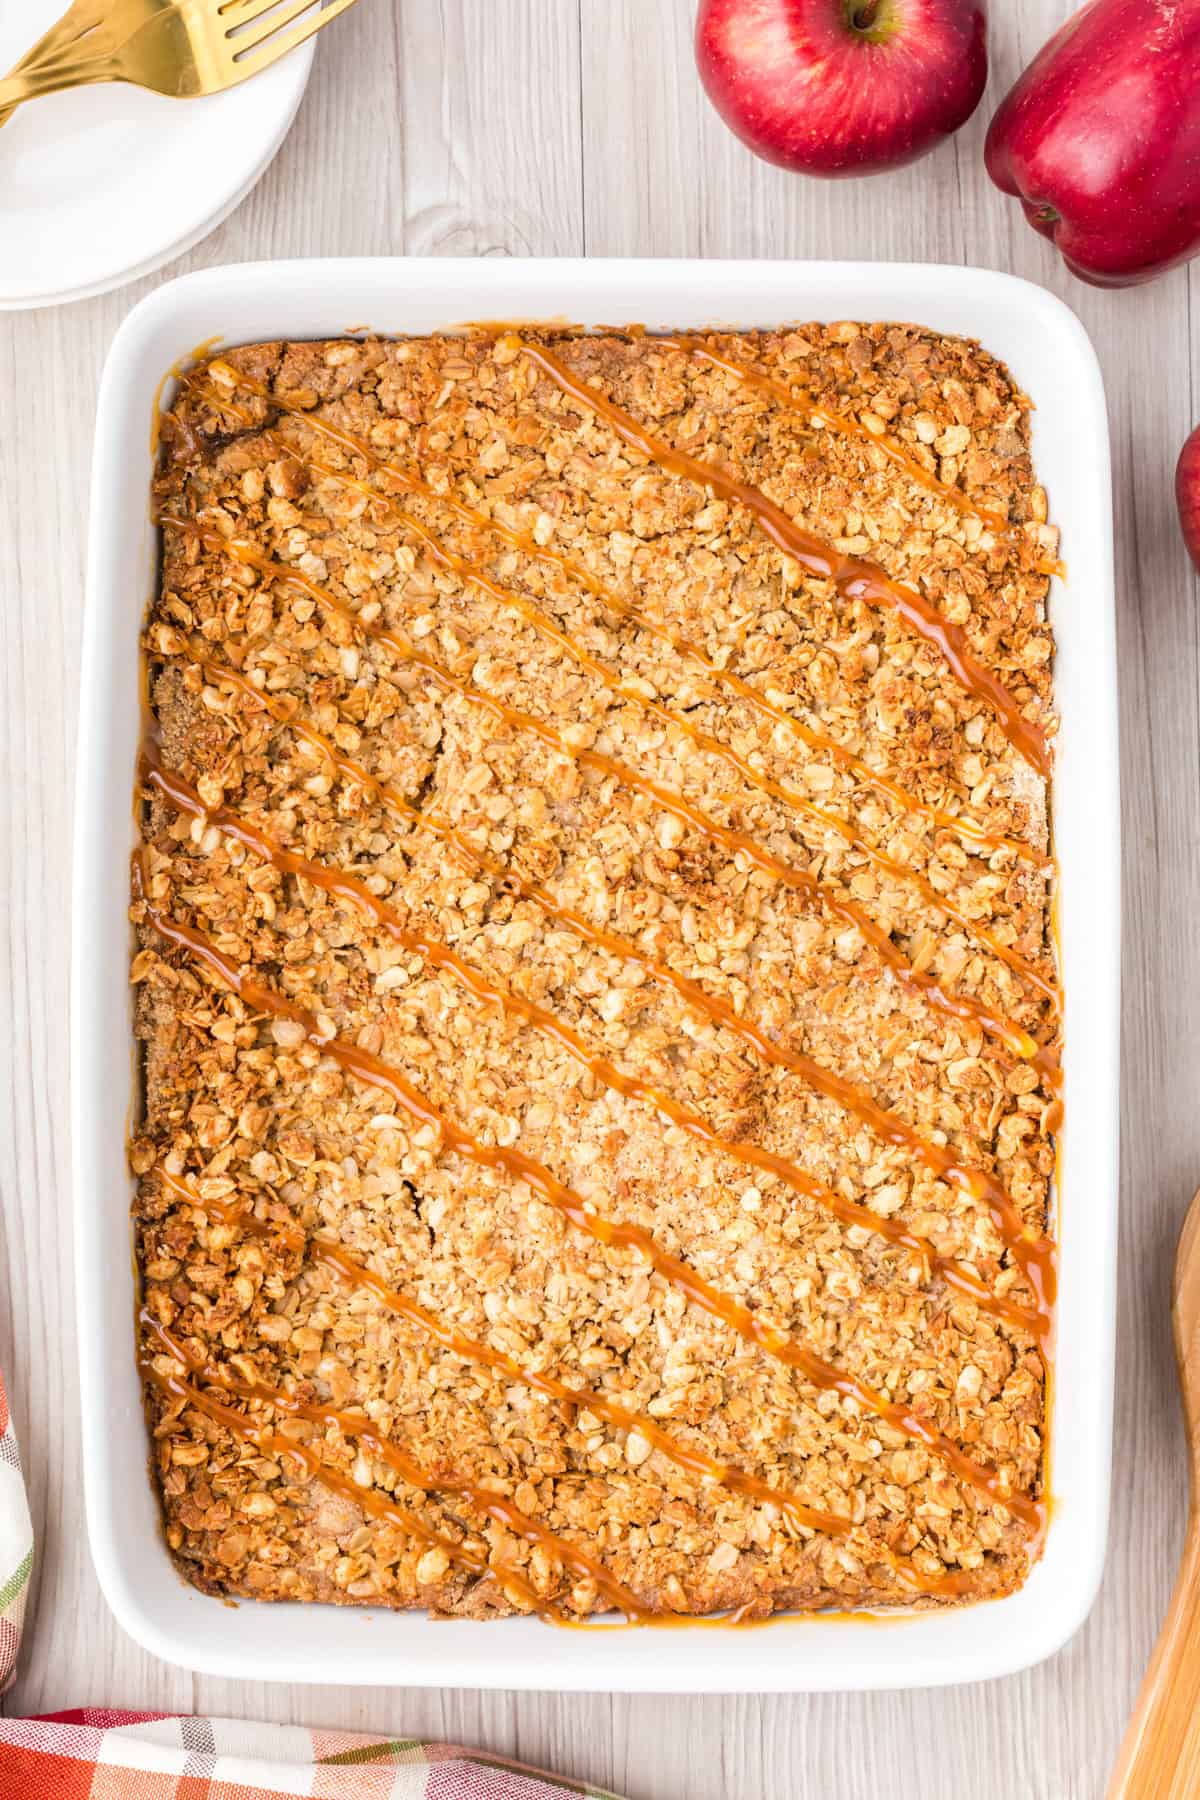 Apple crisp with oat granola and caramel drizzle in a rectangular baking pan.